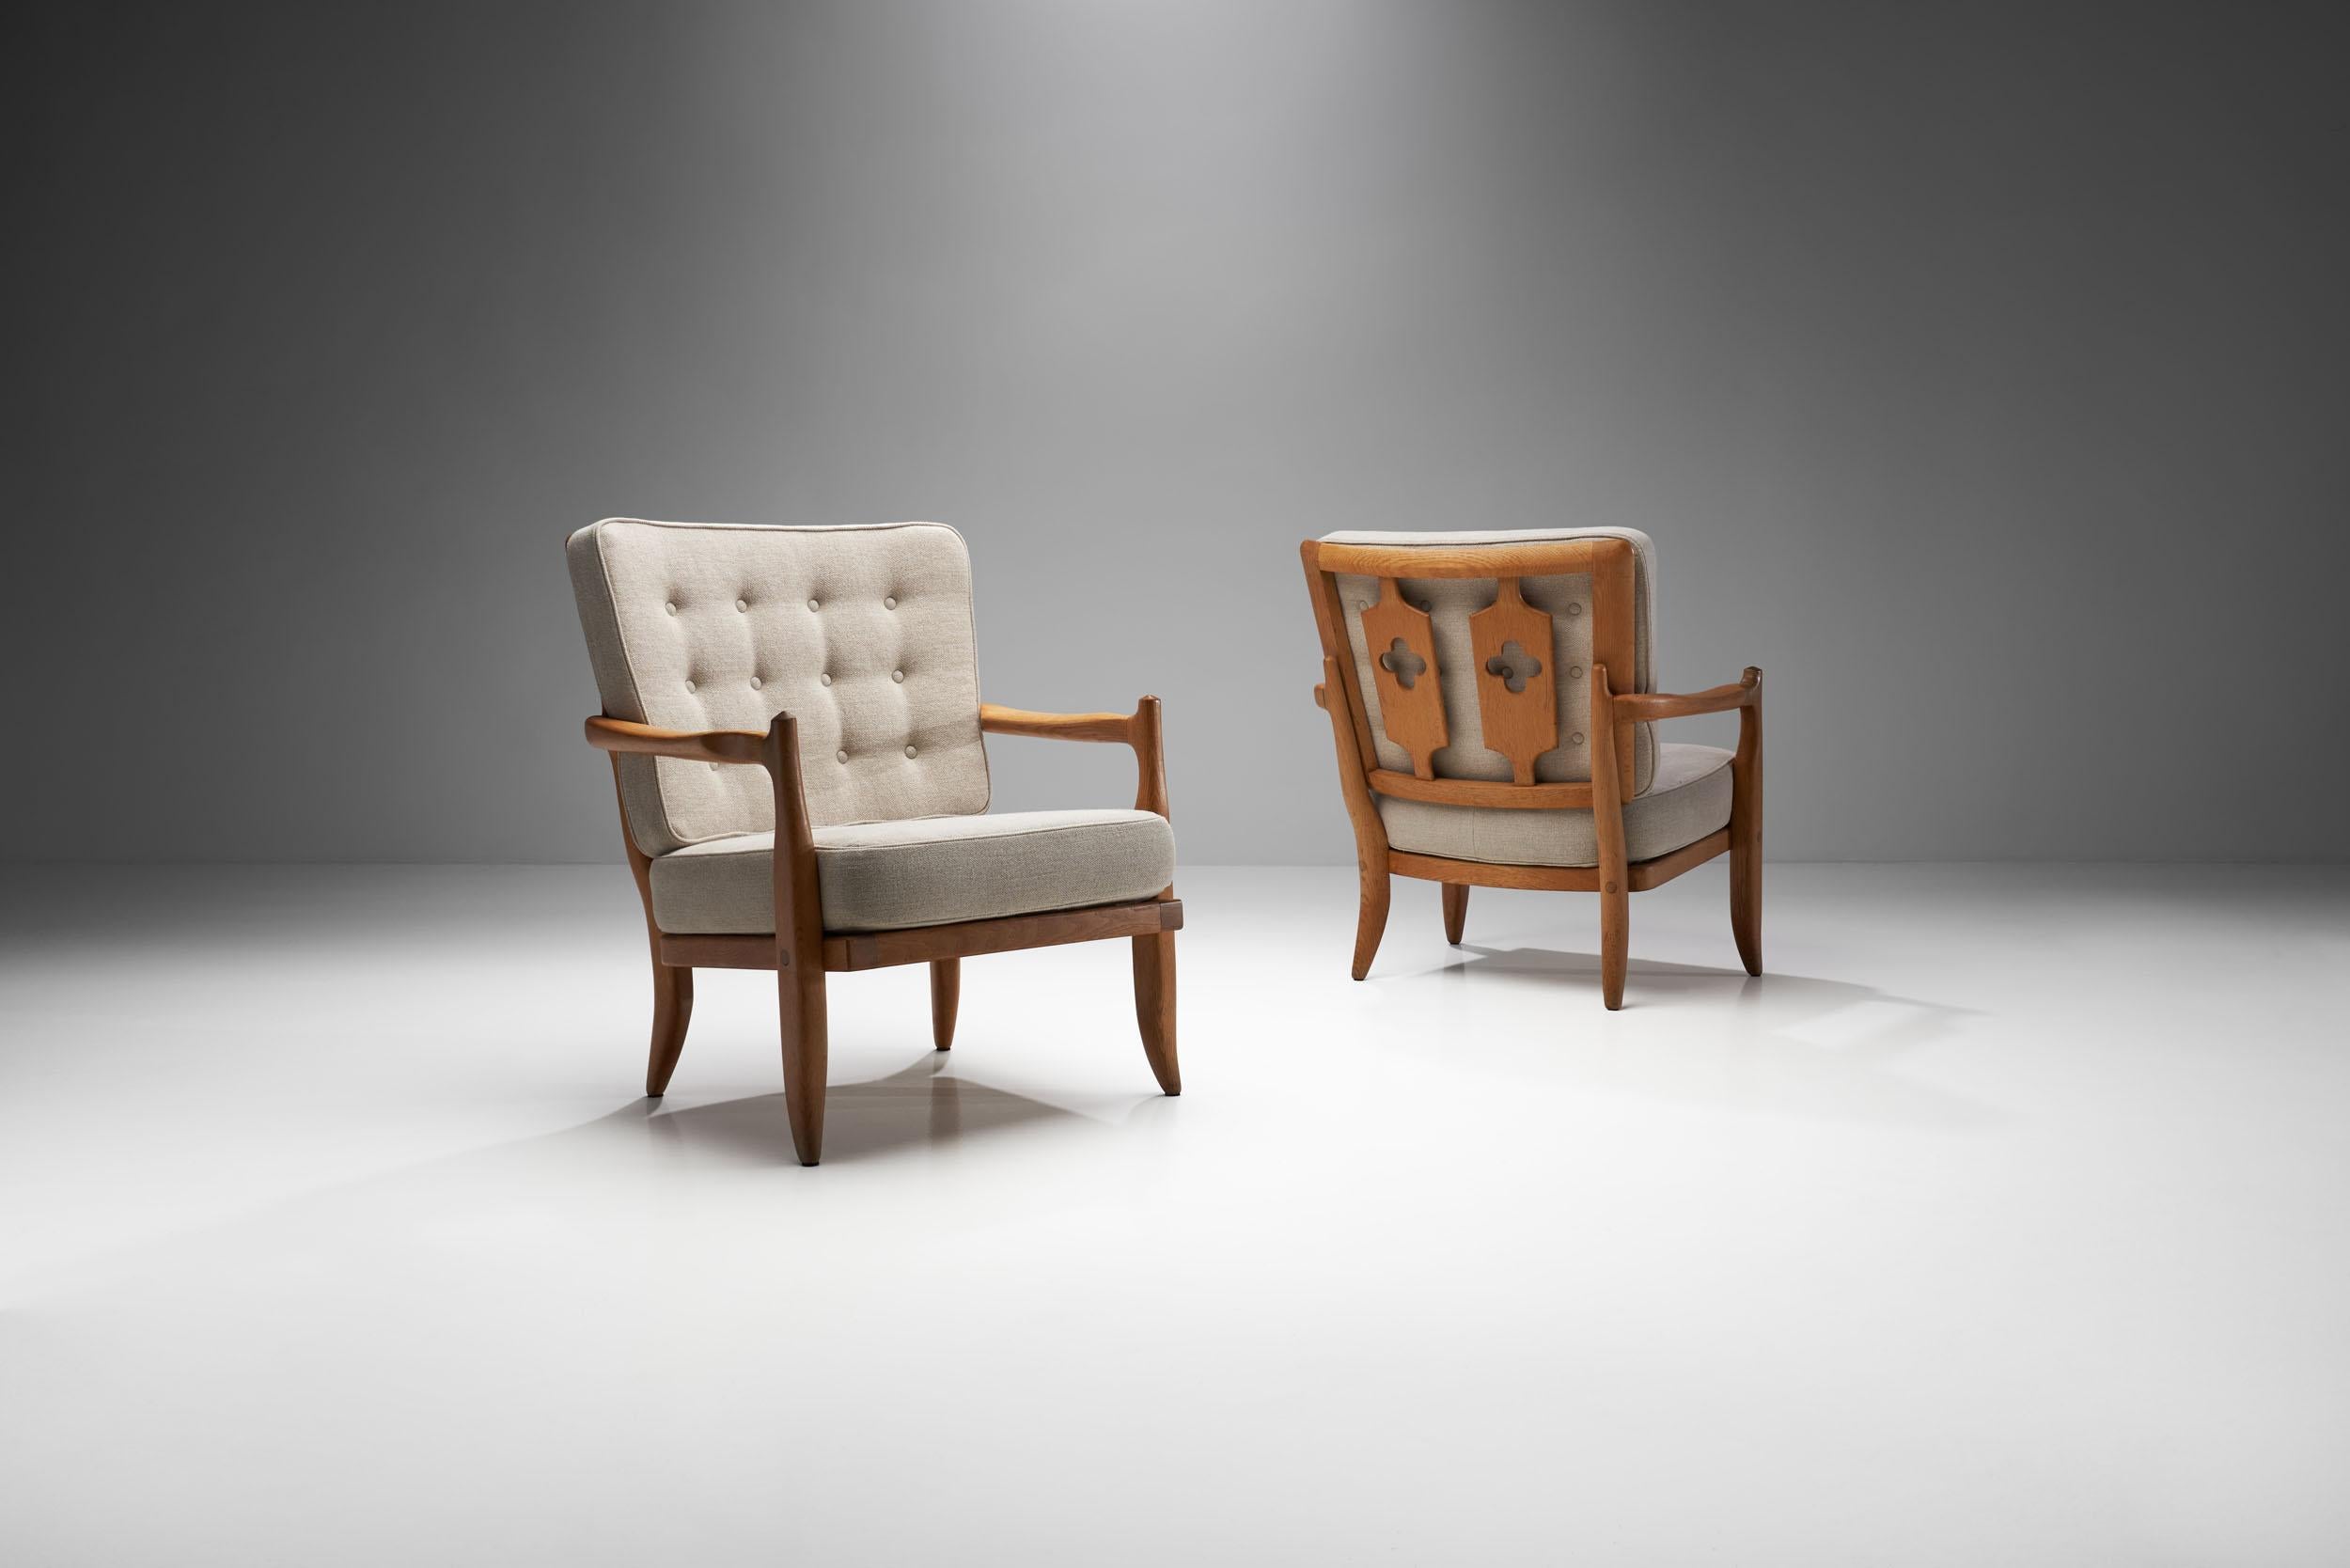 A pair of mid-century “José” oak armchairs by Guillerme et Chambron, Votre Maison edition. Made of high-quality oak with a beautiful fabric, this pair of the famous José chair is truly eye catching.

The carefully carved geometrical patterns on the